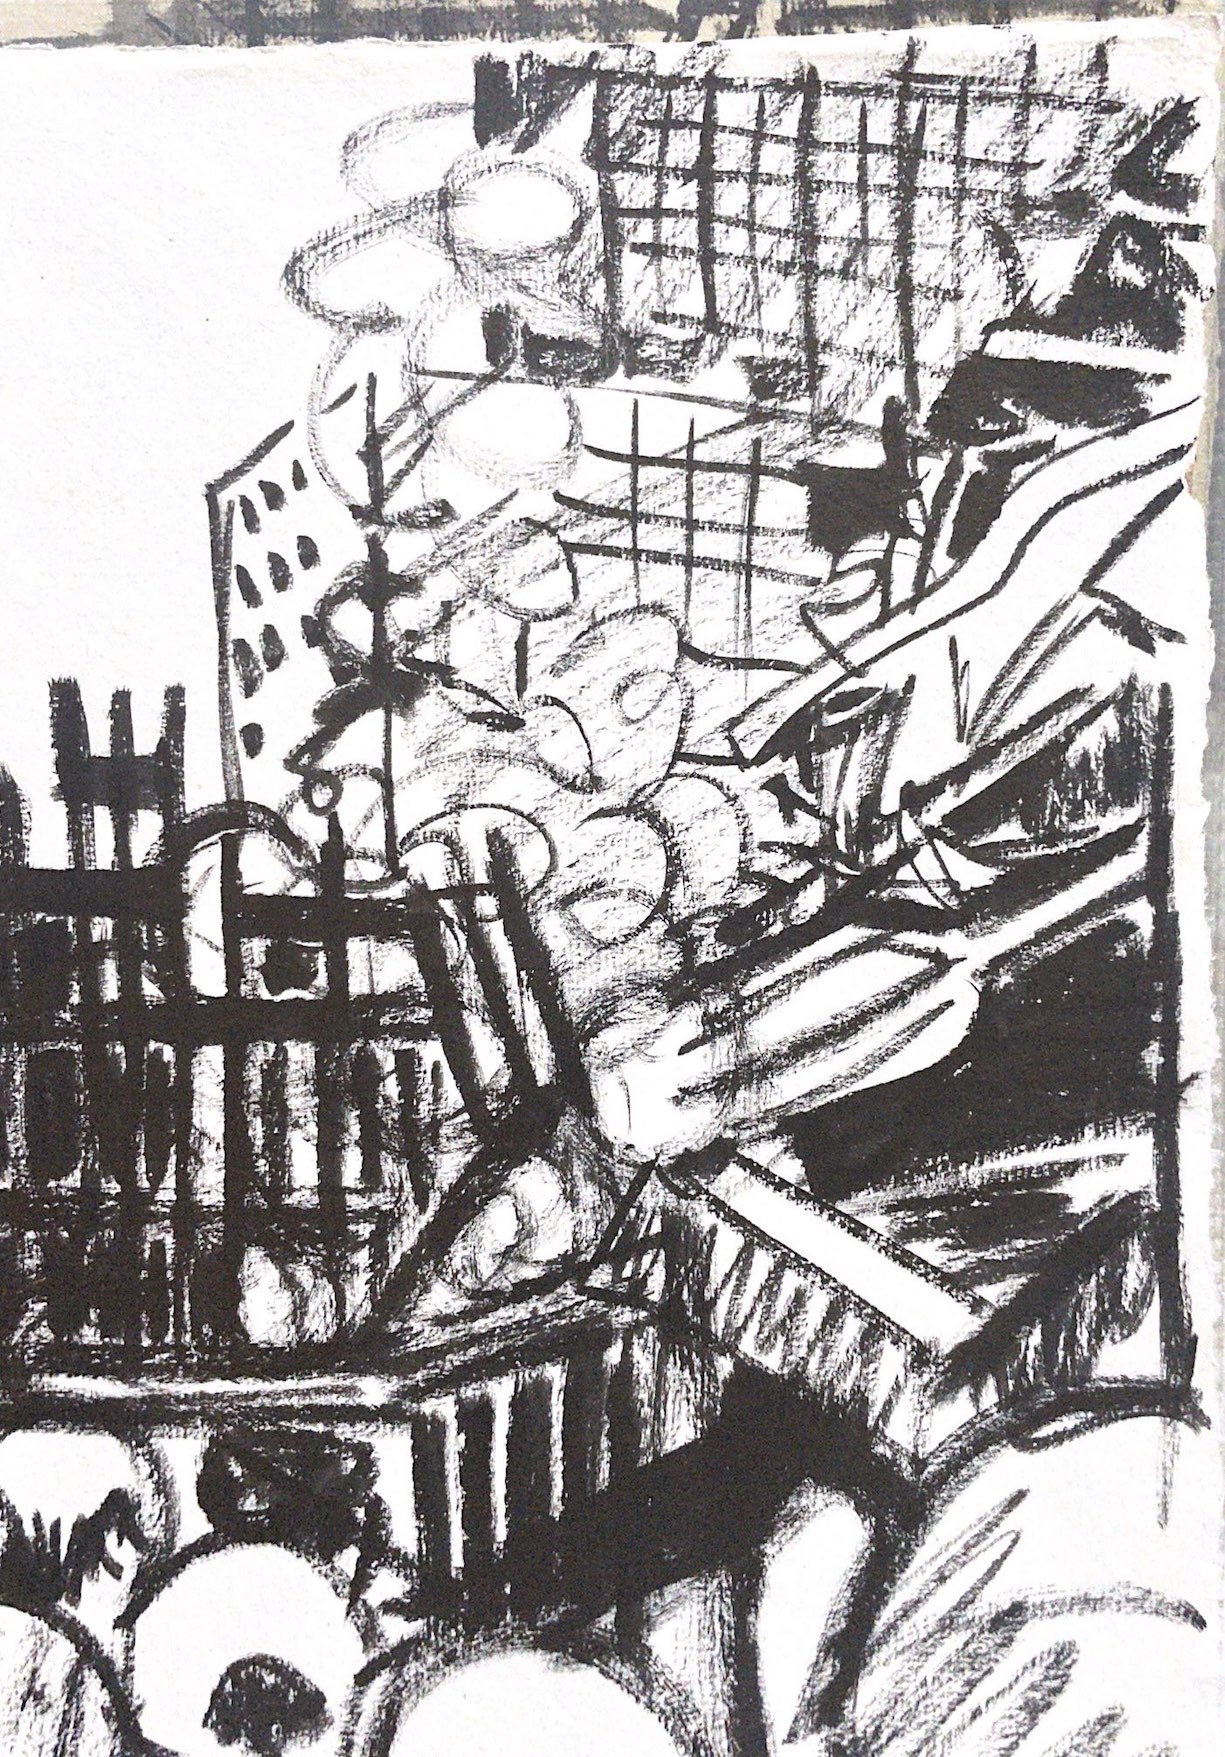 Ink drawing of the rescue and recovery efforts at Ground Zero